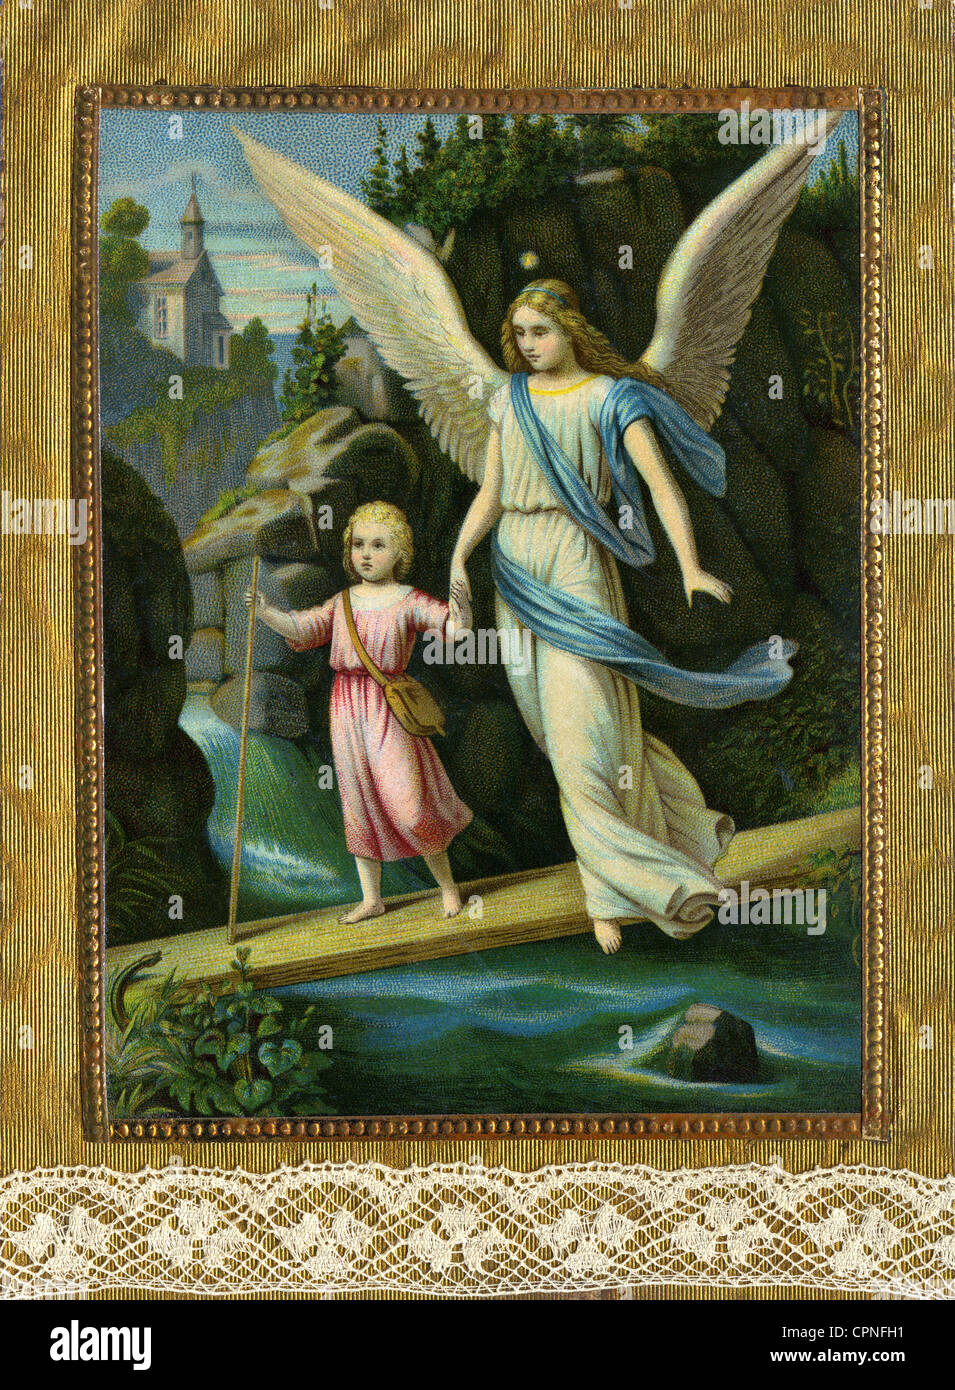 religion, Christianity, angels, guardian angel guarding child, Germany, circa 1880, Additional-Rights-Clearences-Not Available Stock Photo